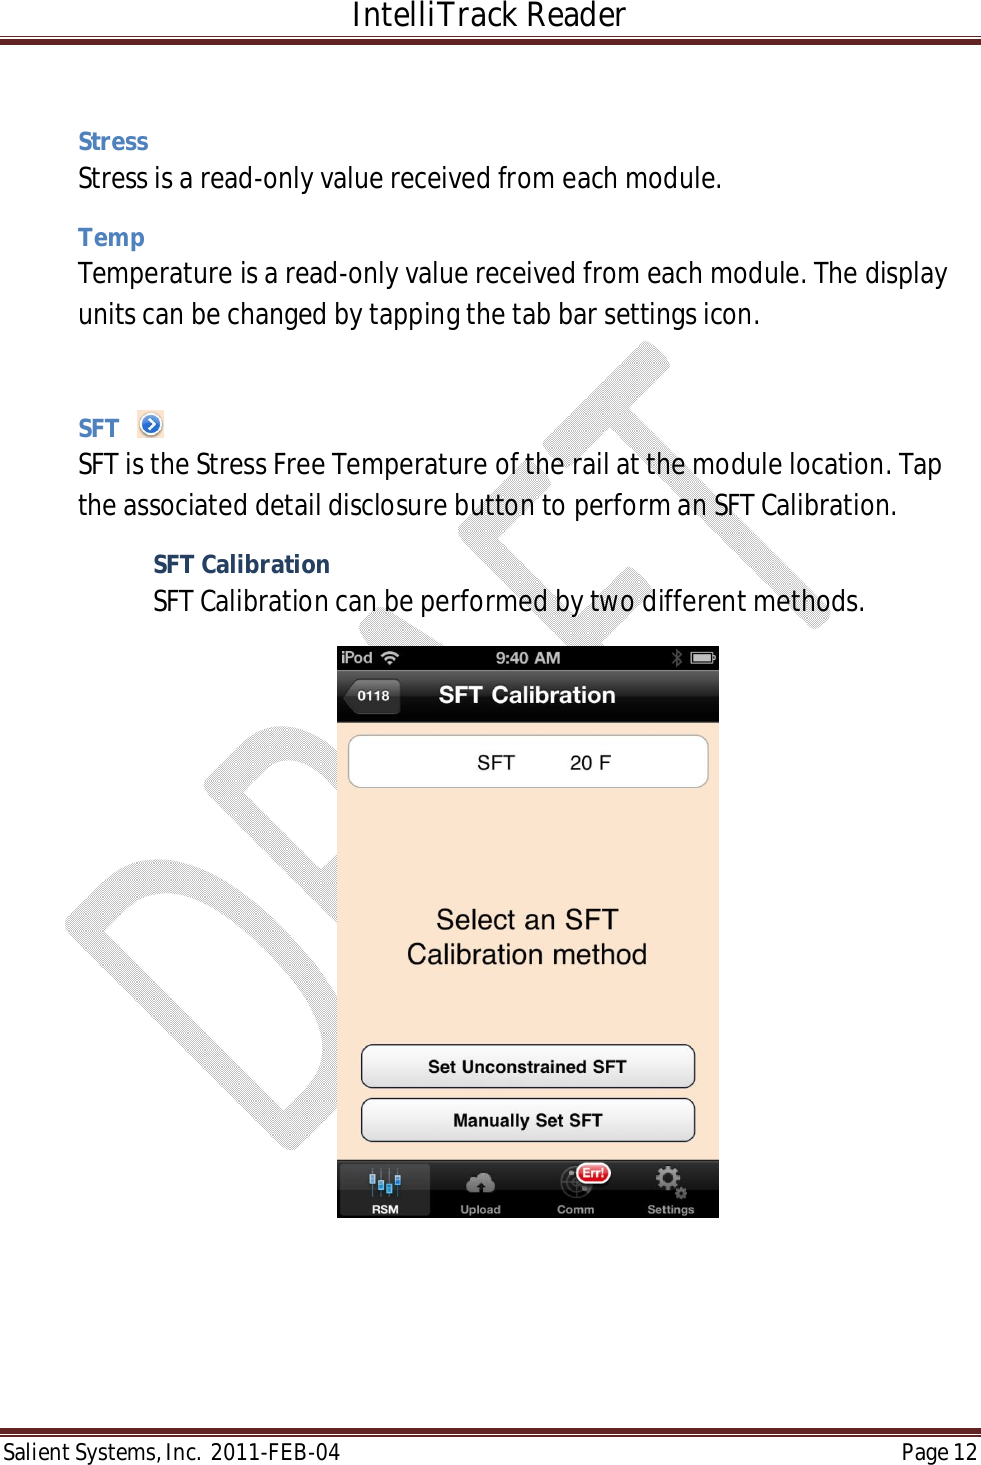 IntelliTrack Reader  Salient Systems, Inc.  2011-FEB-04 Page 12   Stress Stress is a read-only value received from each module.  Temp Temperature is a read-only value received from each module. The display units can be changed by tapping the tab bar settings icon.  SFT     SFT is the Stress Free Temperature of the rail at the module location. Tap the associated detail disclosure button to perform an SFT Calibration. SFT Calibration SFT Calibration can be performed by two different methods.   